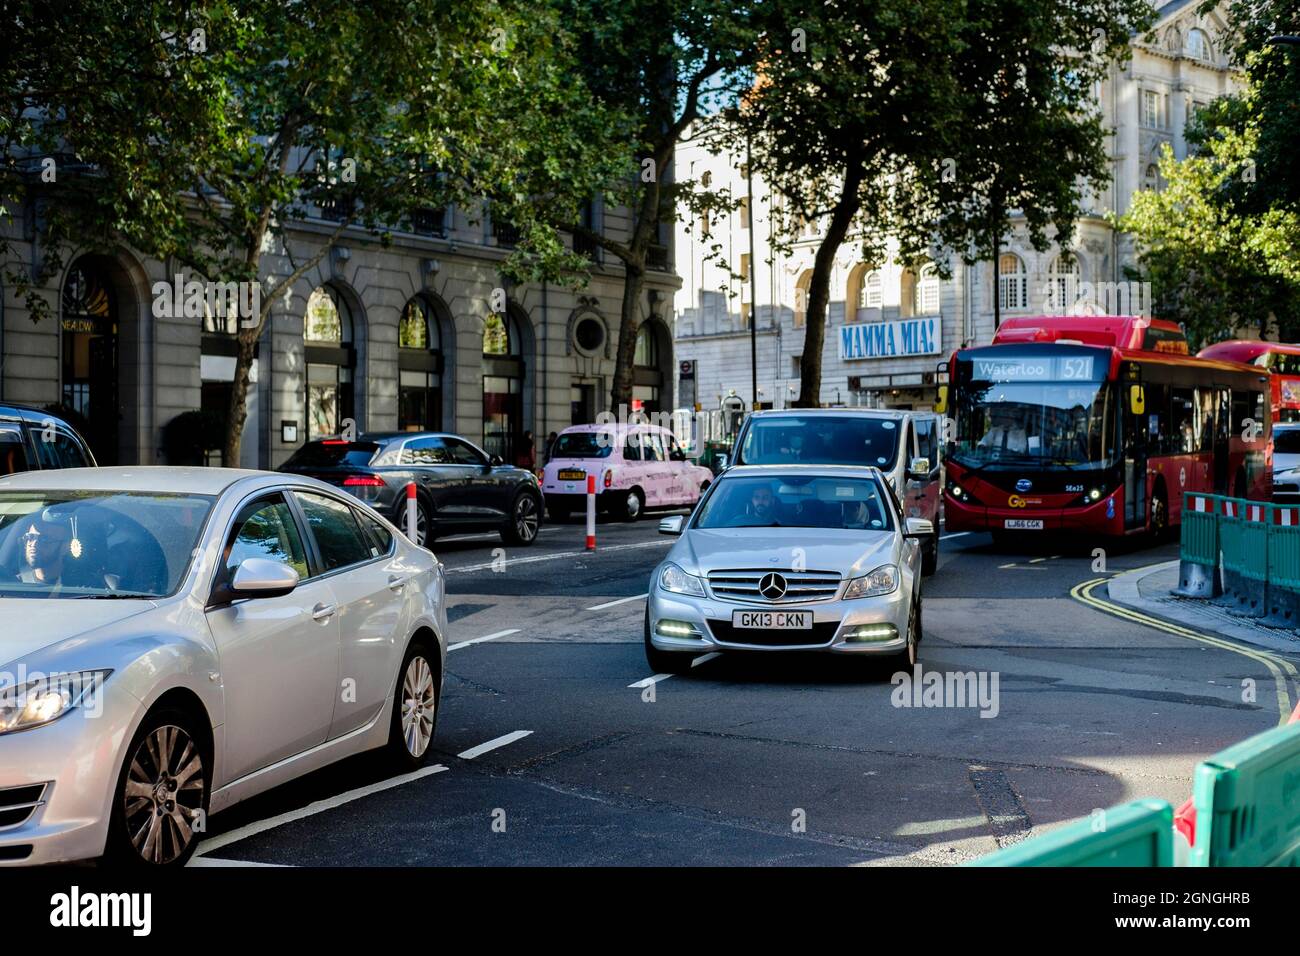 Aldwych two-way traffic flow system introduced in August 2021 as part of Westminster Council's Strand pedestrianisation project. London UK. Stock Photo